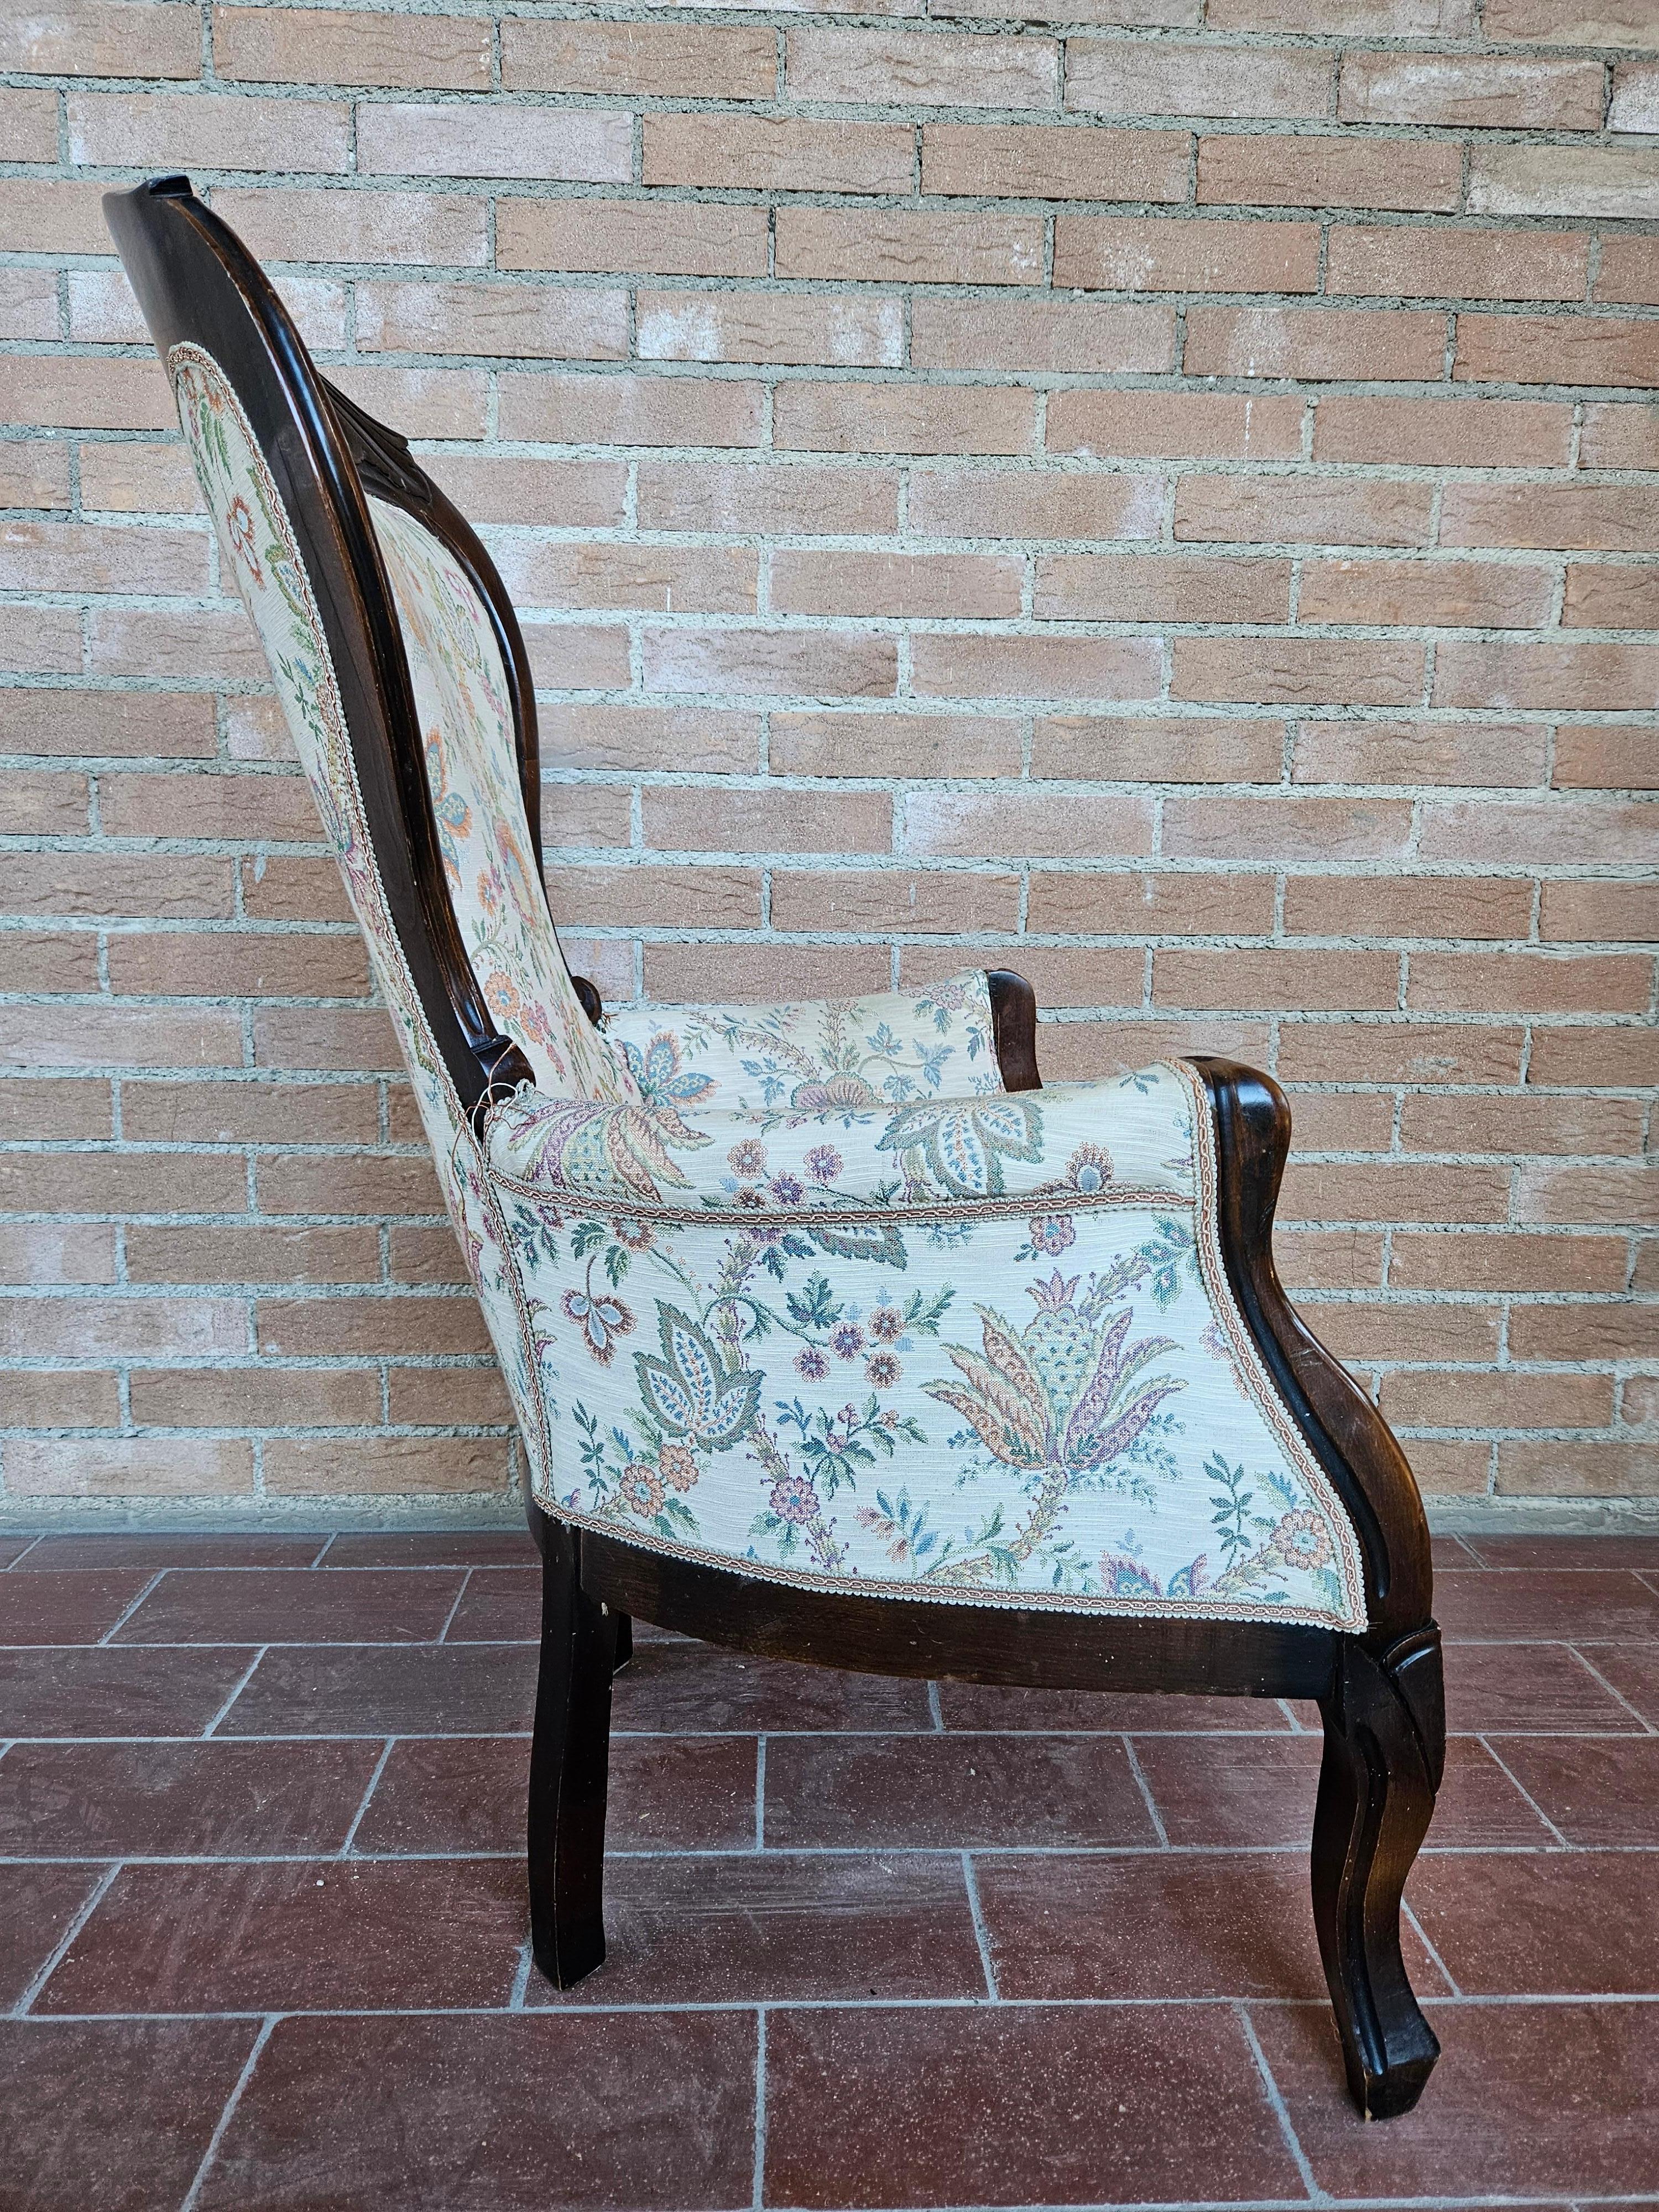 Louis Philippe-style upholstered armchair with walnut frame and floral-themed fabric.

Small imperfections in the fabric as pictured.
